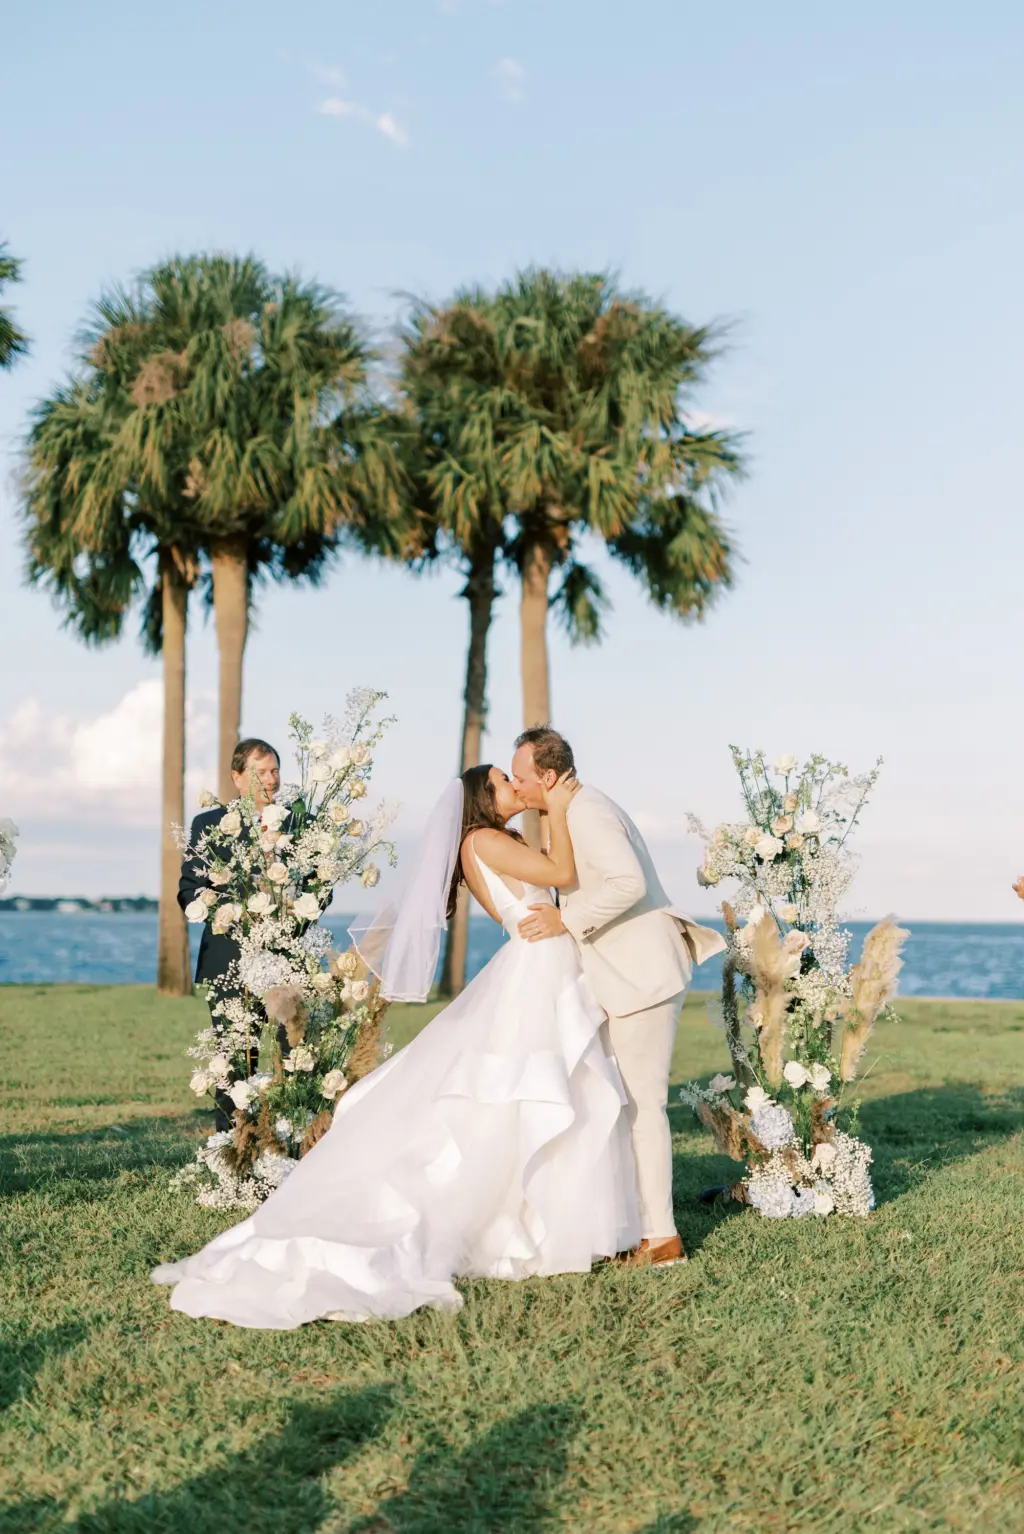 Outdoor Waterfront Florida Wedding Ceremony | Tall Boho Altar Flower Arrangement Decor Inspiration with Pampas Grass, Baby's Breath, Blue Hydrangeas, and White Roses